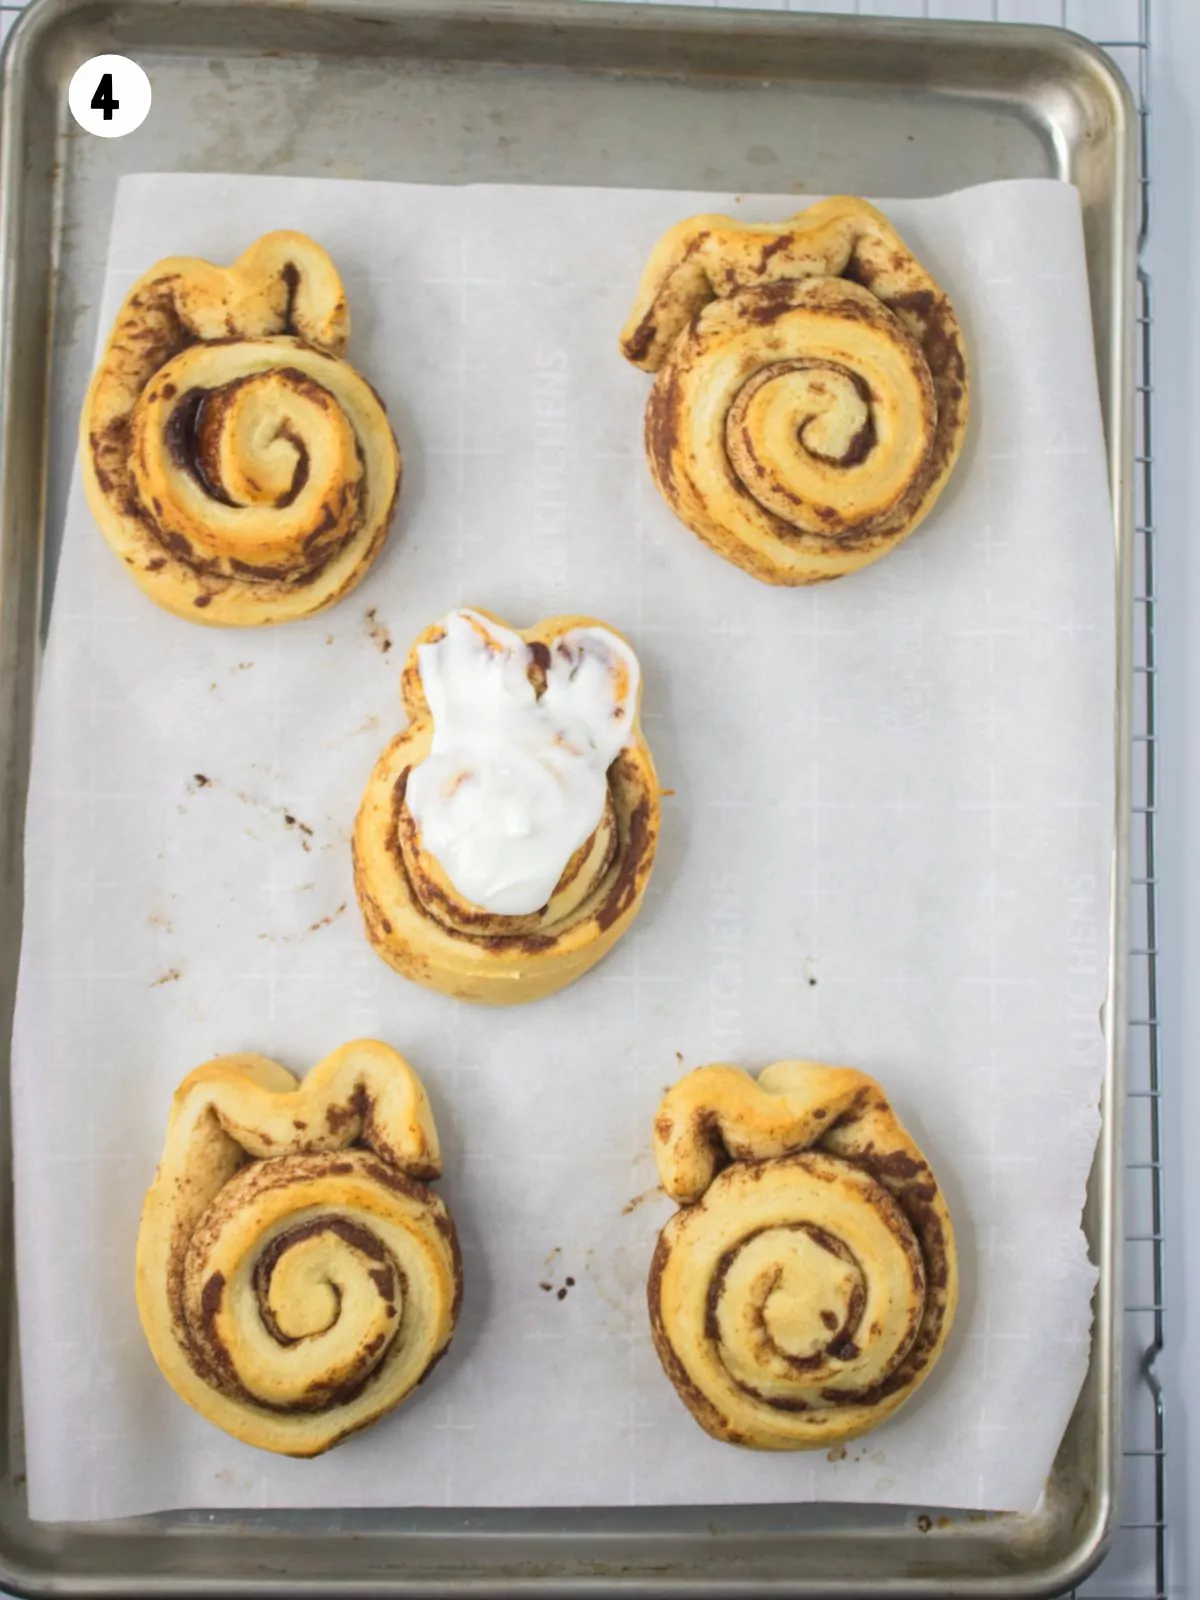 One frosted cinnamon roll and 4 unfrosted.